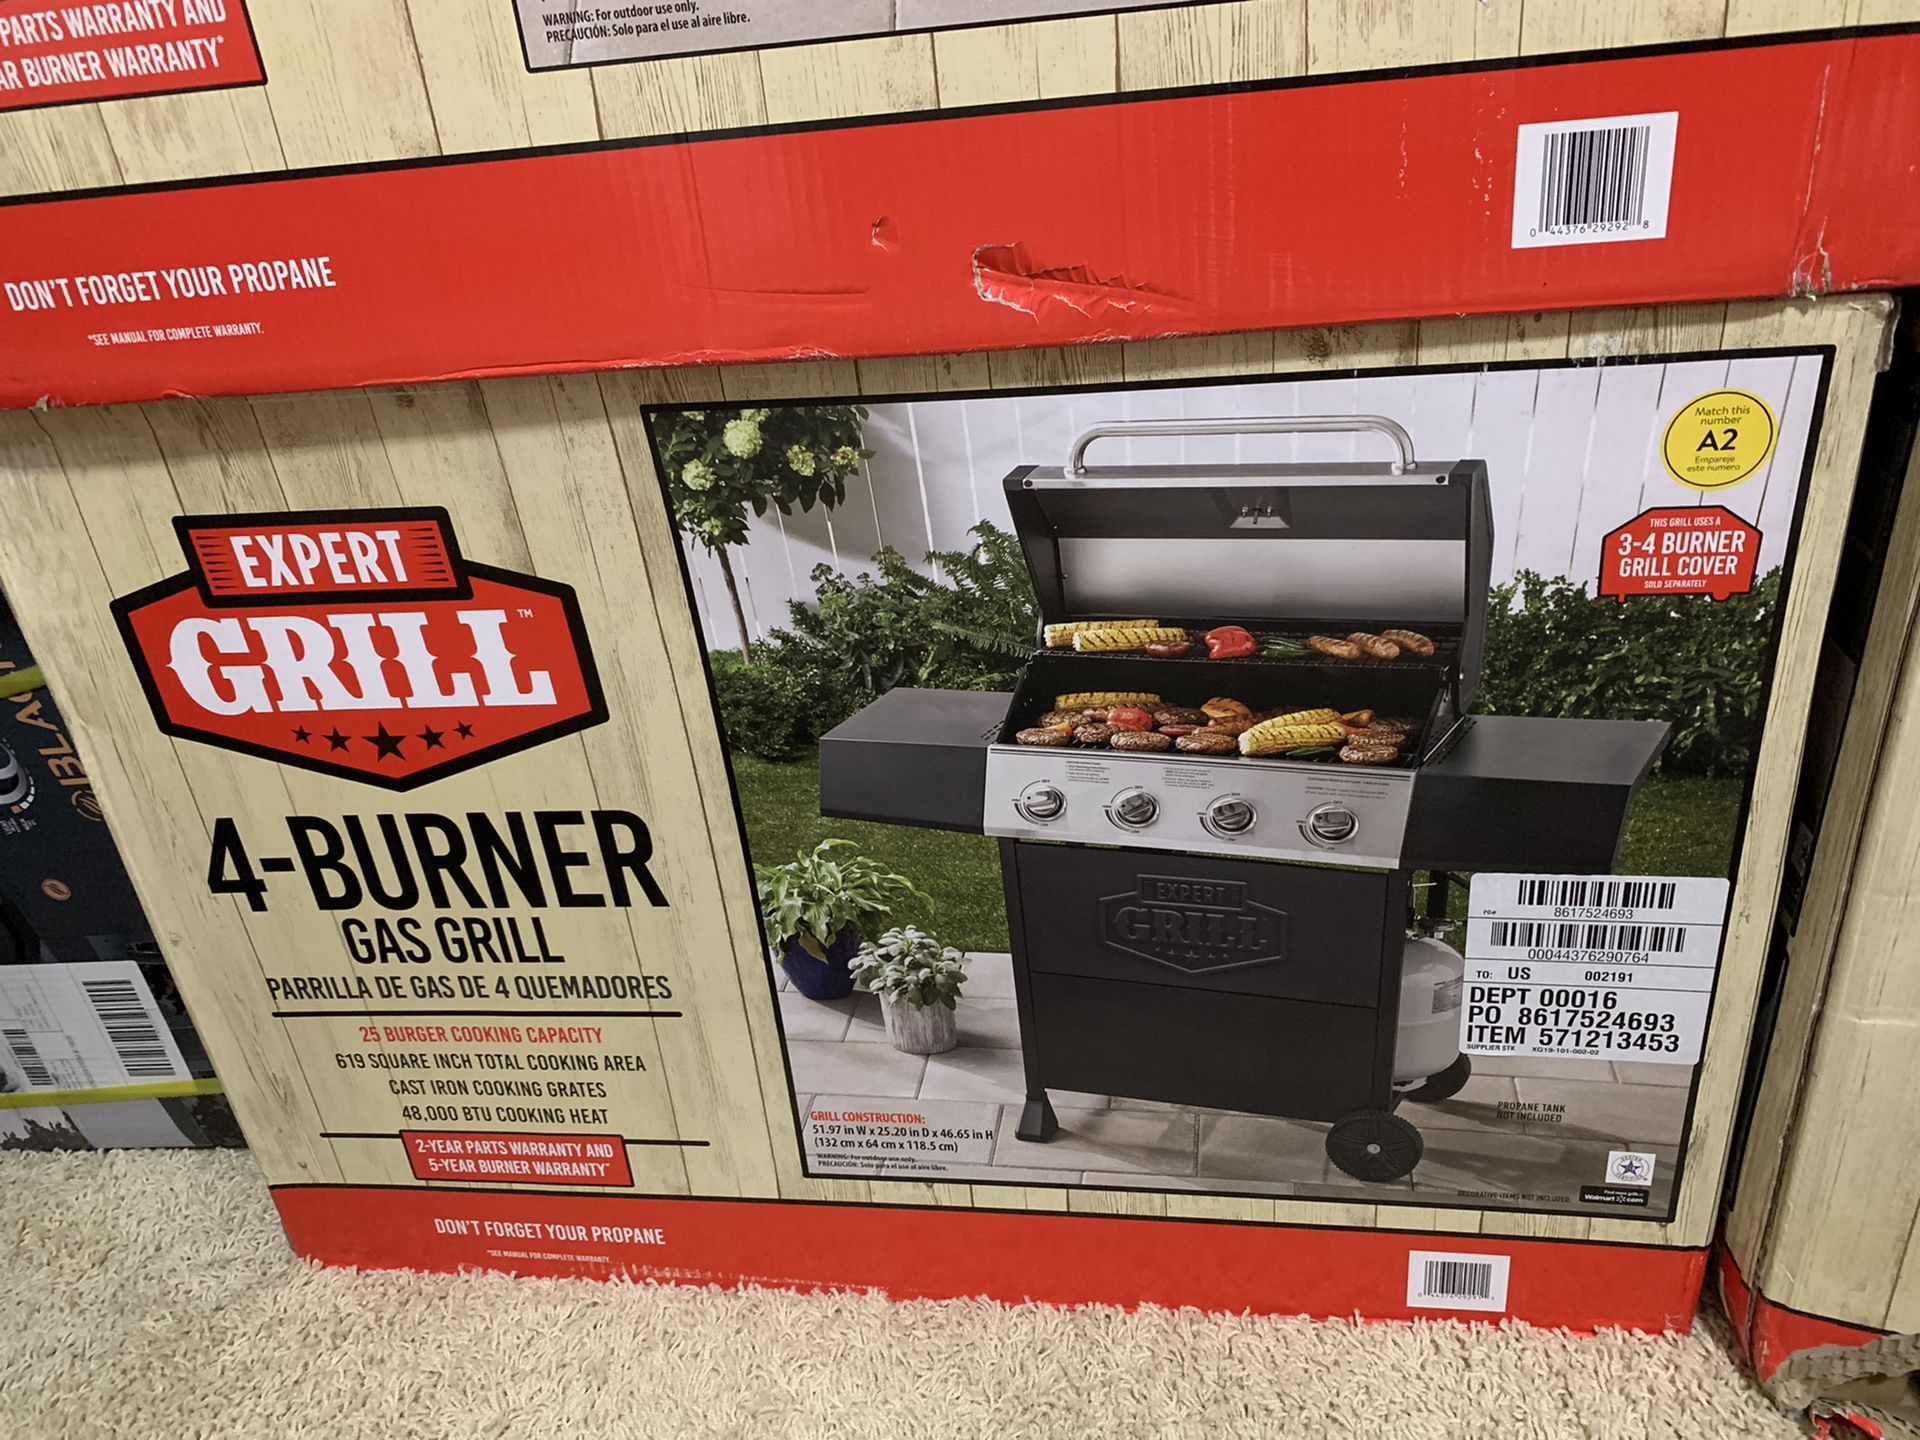 4 burner bbq grill two left !!!!!!